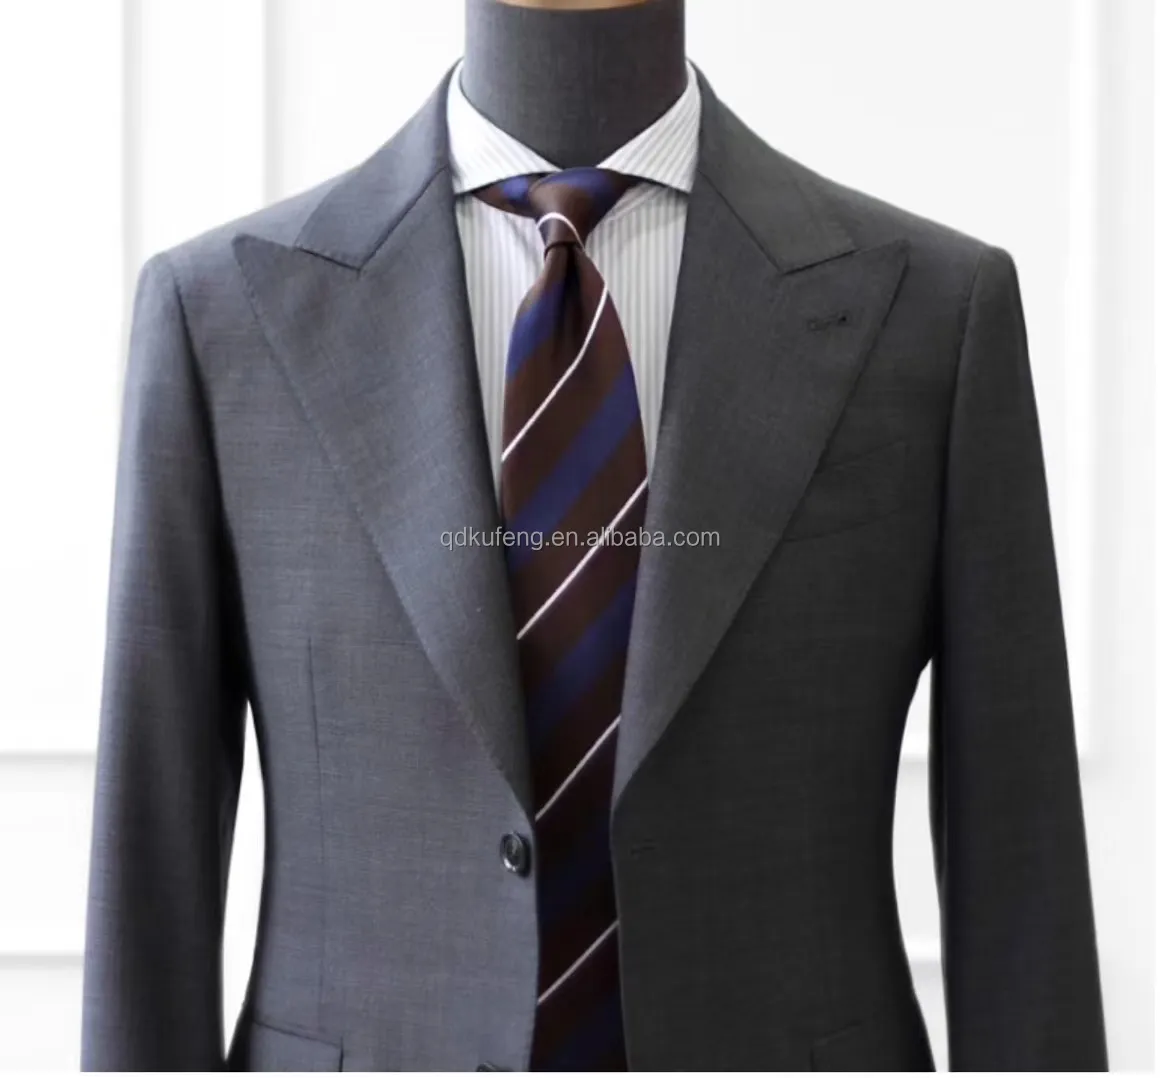 grey single breasted formal suit for men's suits blazer and pants